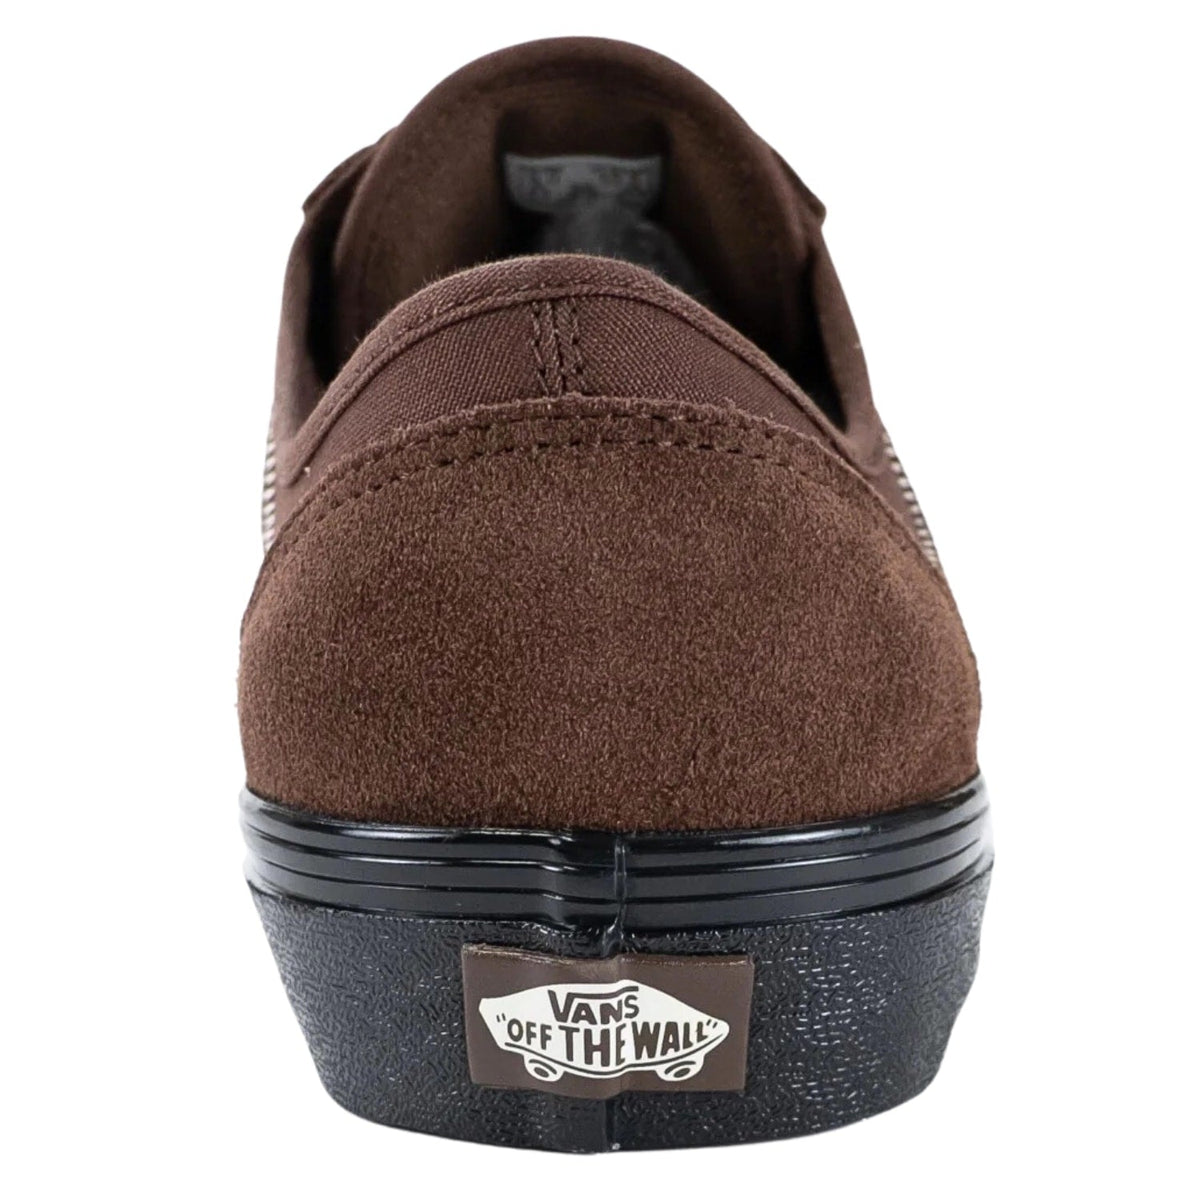 Vans Style 36 Decon VR3 Mikey February Shoes - Dark Brown - Mens Skate Shoes by Vans